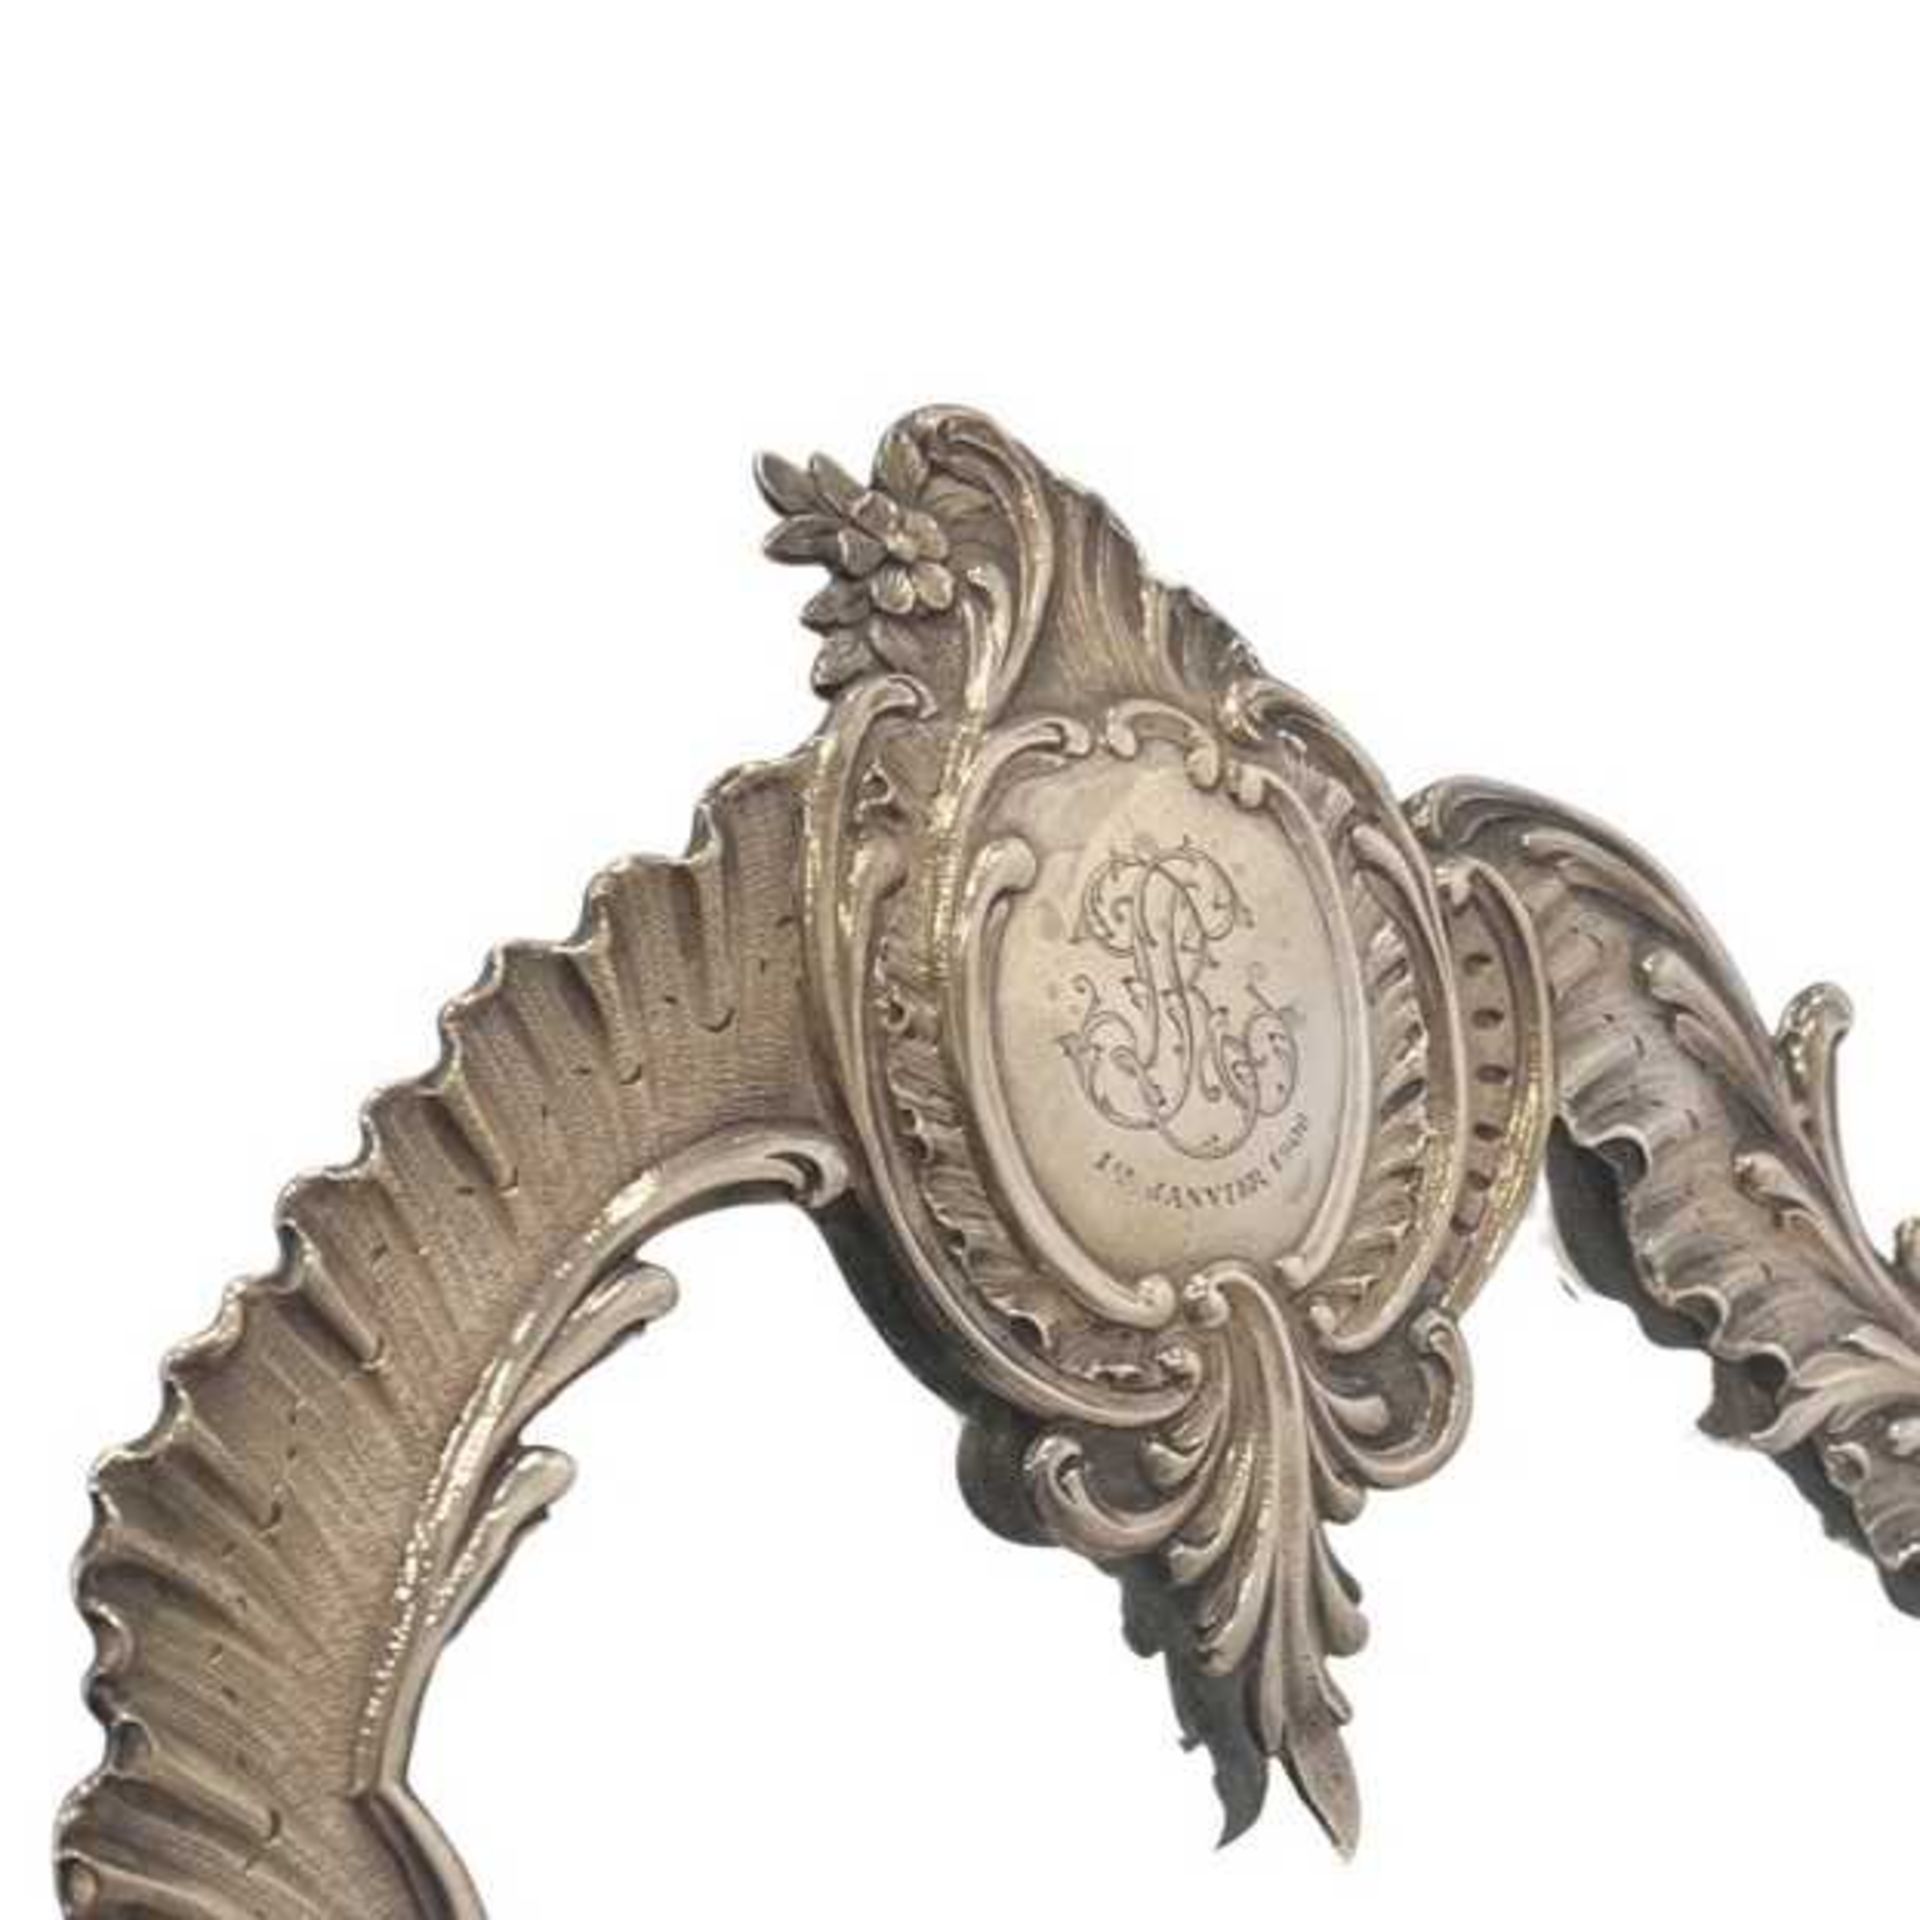 AN EARLY 20TH CENTURY FRENCH SILVER TOILETTE MIRROR BY MOUTOT, PARIS, DATED 1906 - Image 5 of 5